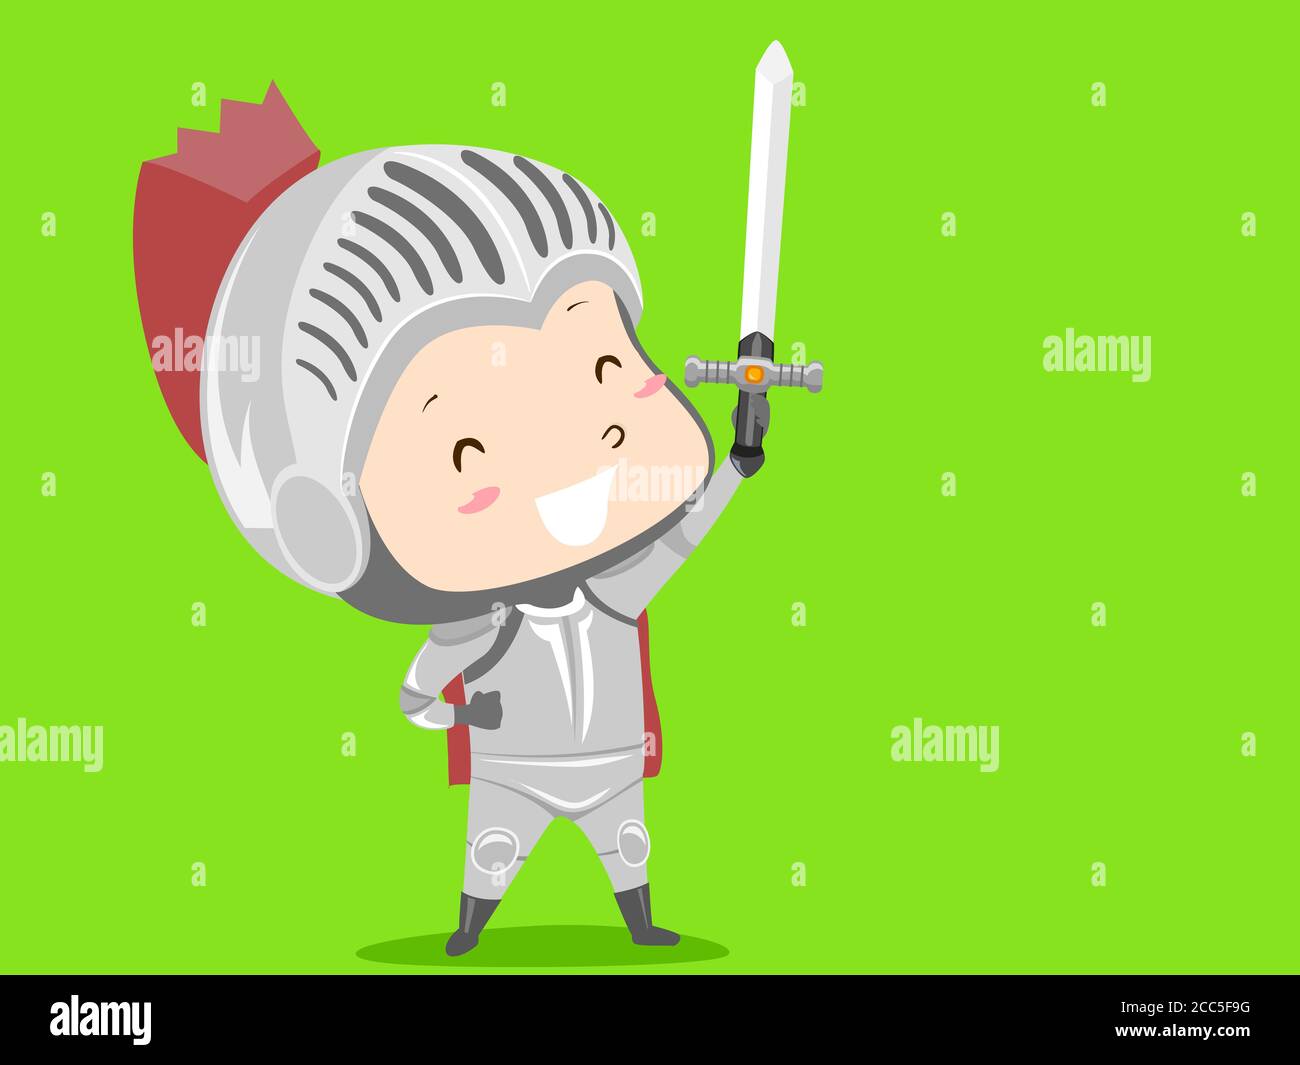 Illustration of a Kid Boy Wearing a Knight Costume with Sword Posing In Front of a Green Screen Stock Photo